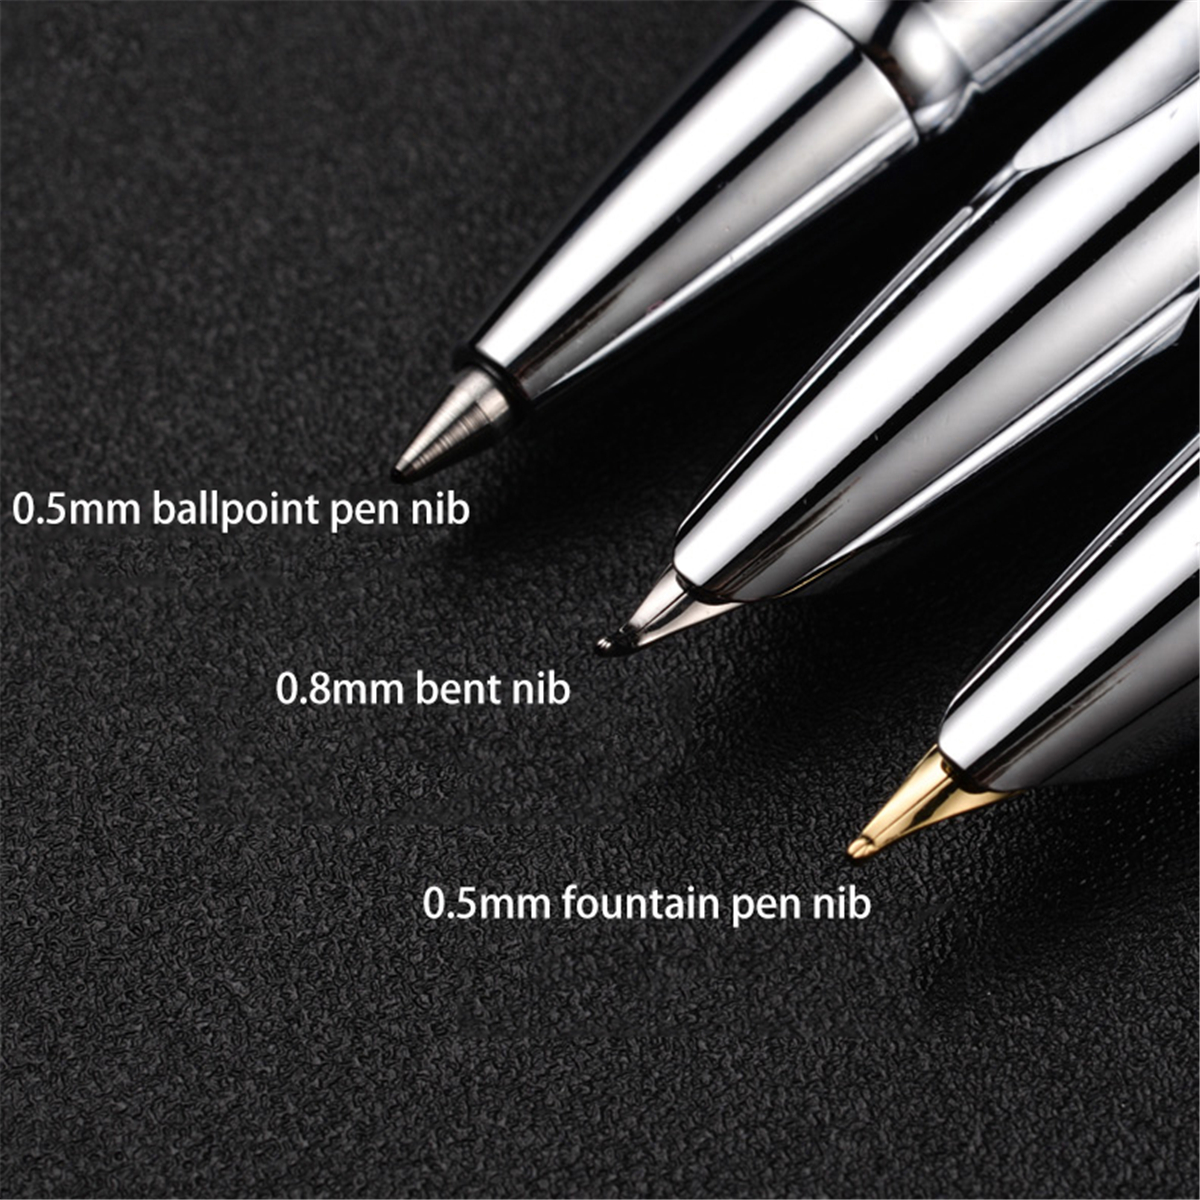 Hero 7006 Fountain Pen Set 0.5mm 0.8mm Nib Calligraphy Writing Signing Pens Ballpoint Pen Gifts Box for Students Friends Families Colleagues